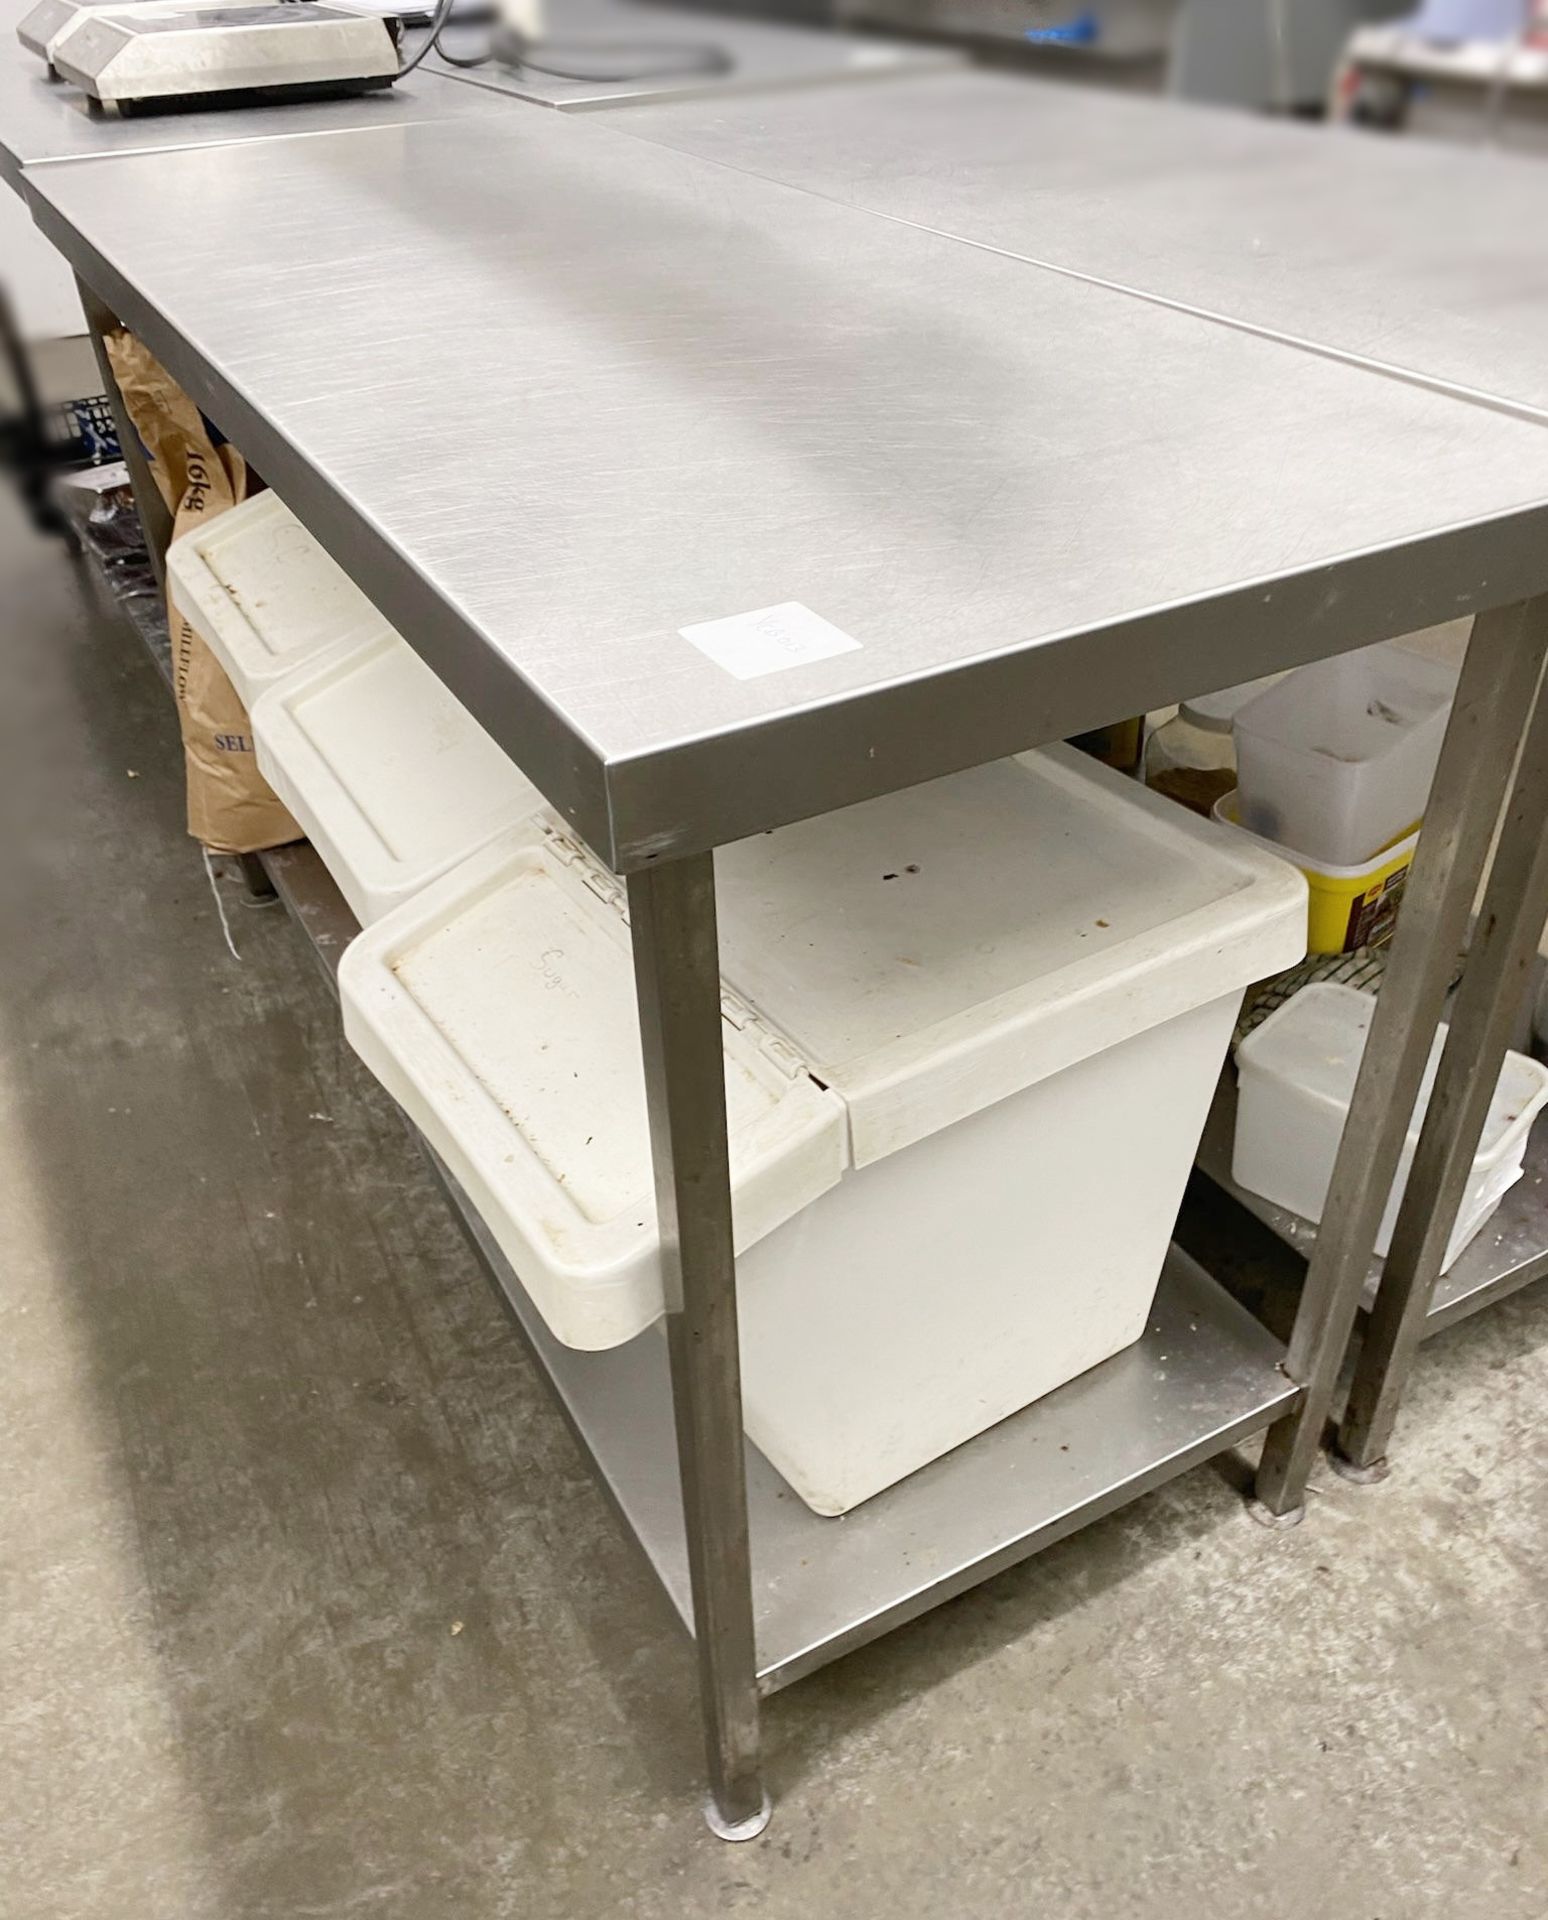 1 x Stainless Steel Prep Table With Three Ingredient Bins - Dimensions: H100 x W150 x D60 cms - Image 2 of 5